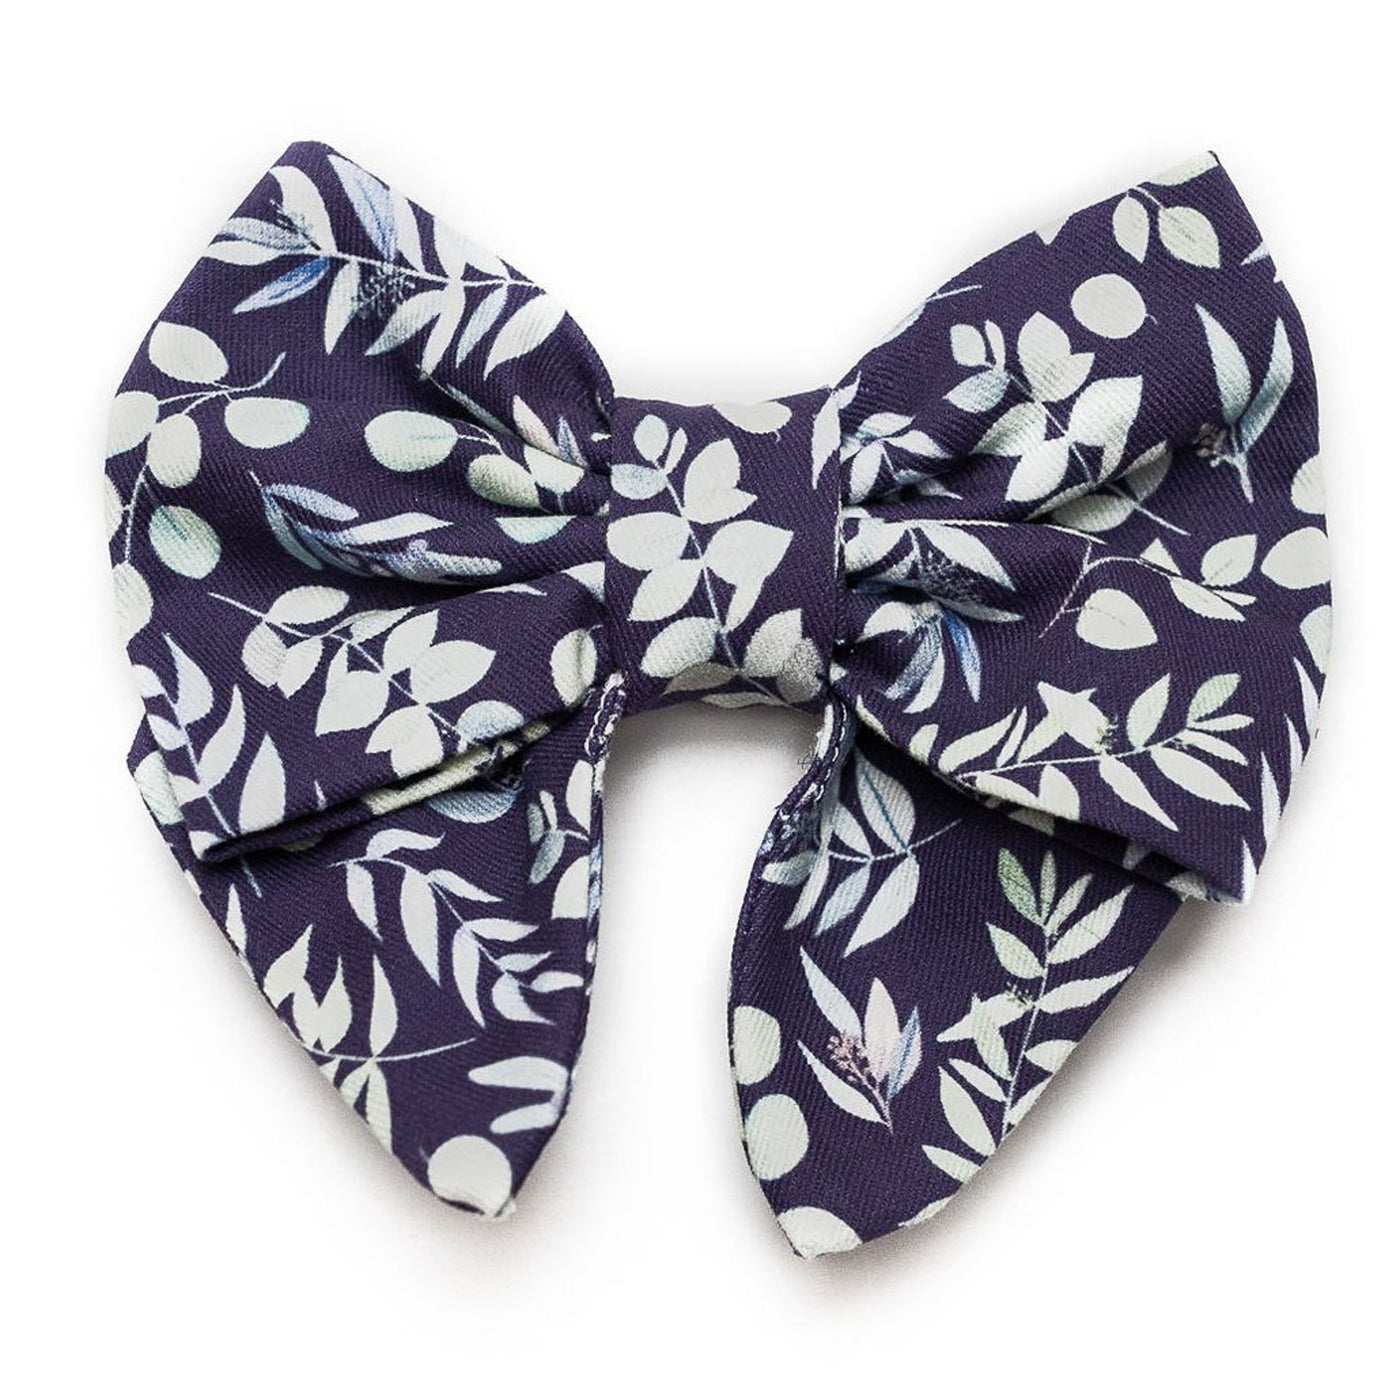 Sailor dog bow in indigo background with mult-color foliage